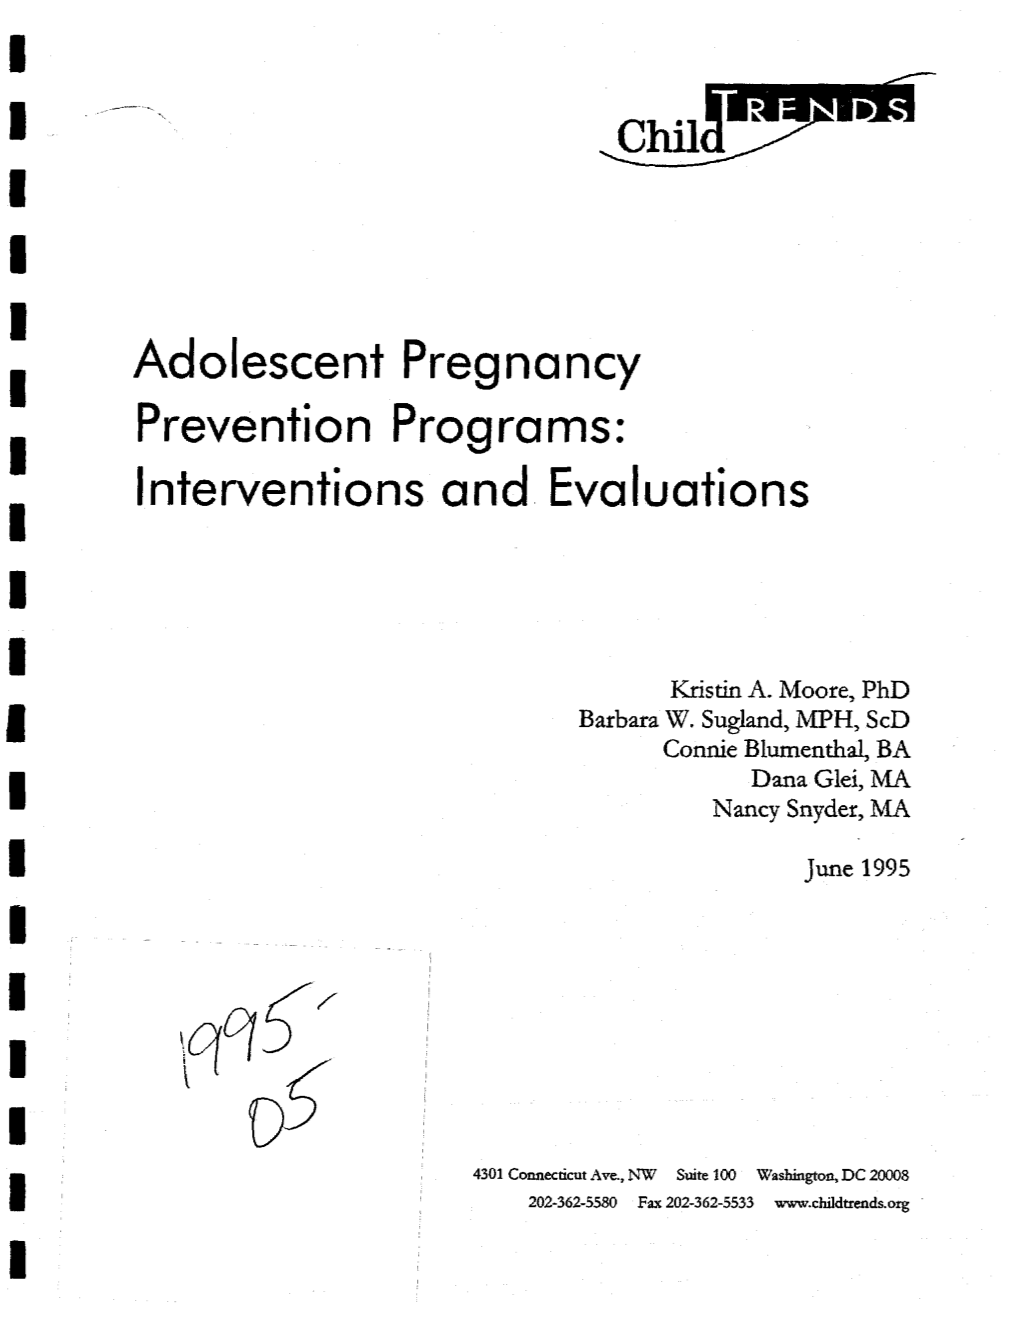 Adolescent Pregnancy Prevention Programs: Interventions and Evaluations